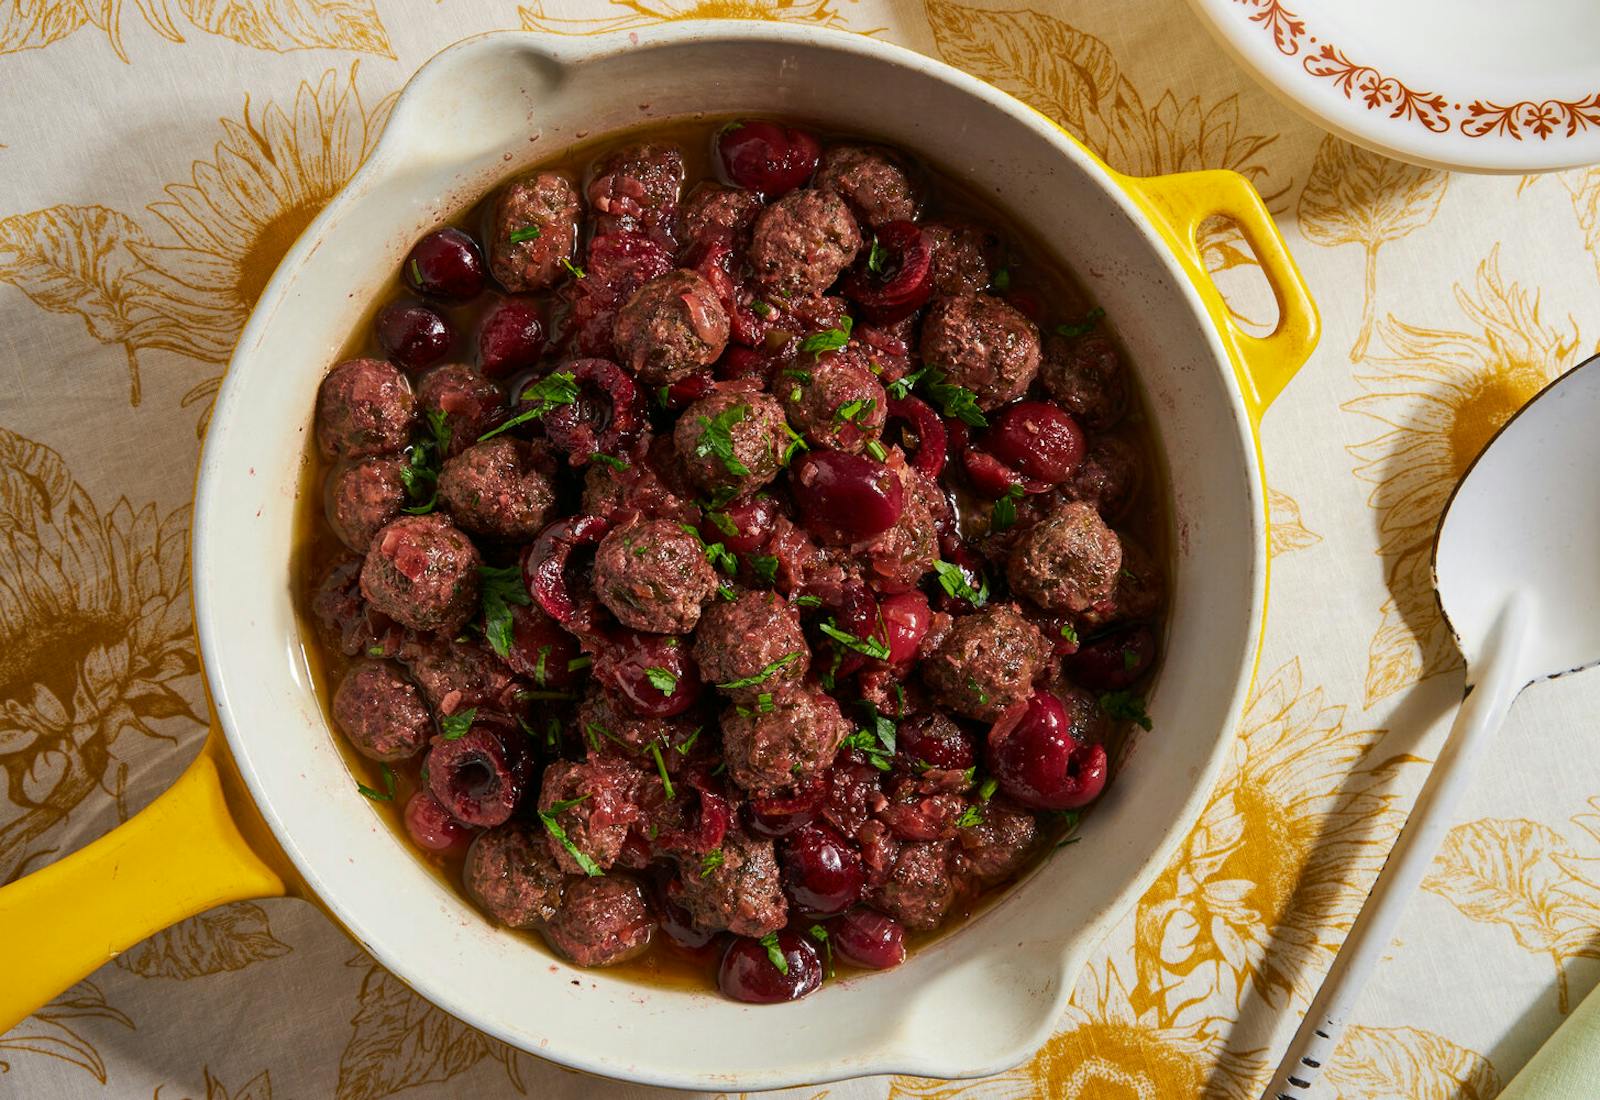 Meatballs and cherries with sliced mint leaves in ceramic dish atop yellow floral tablecloth.